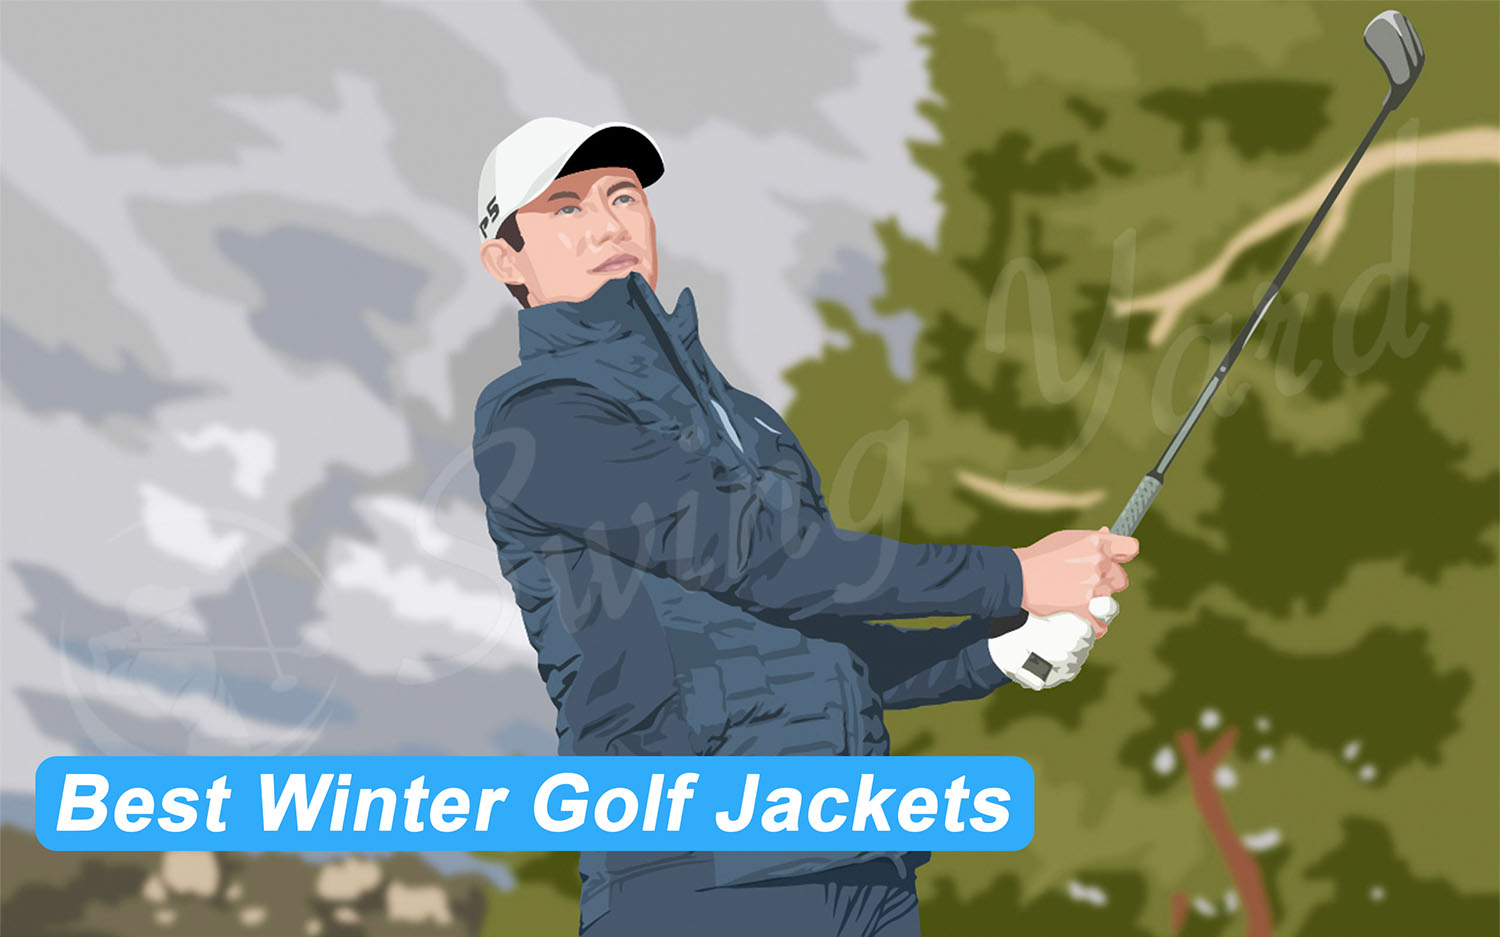 Golfer with a winter jacket on